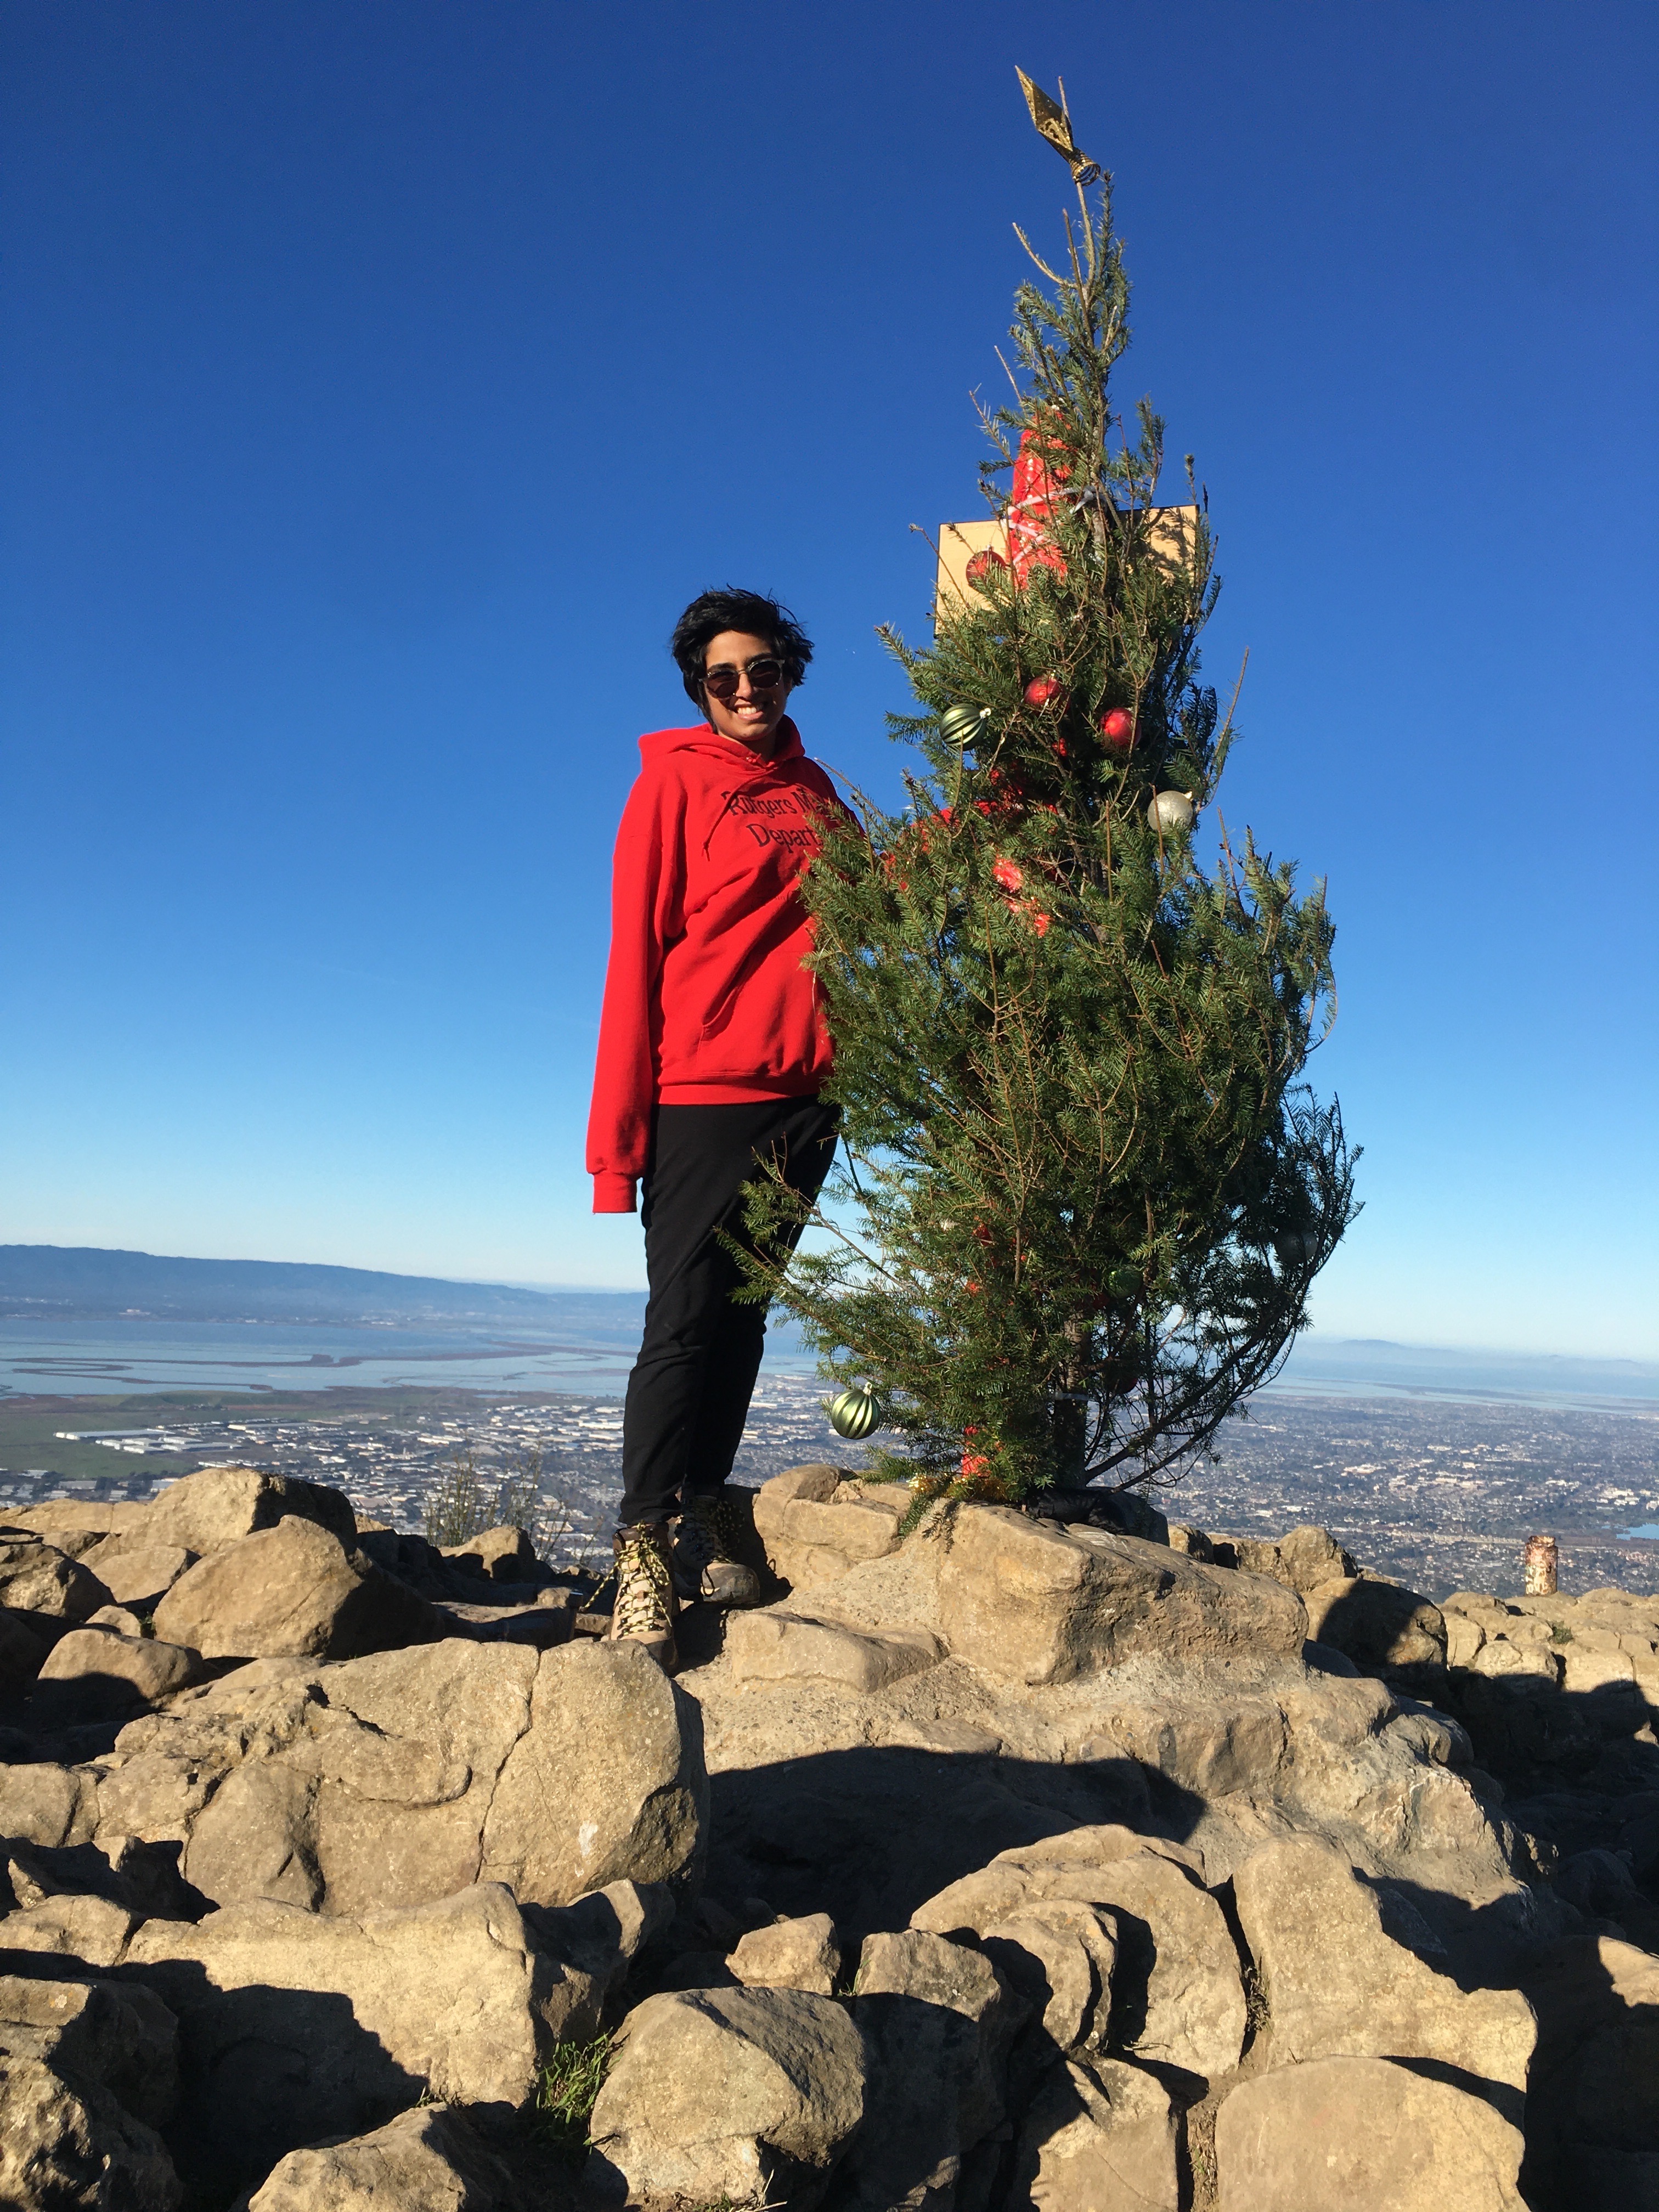 Karuna wearing a Rutgers Math sweatshirt while standing next to a Christmas tree at the top of Mission Peak in Fremont, CA.